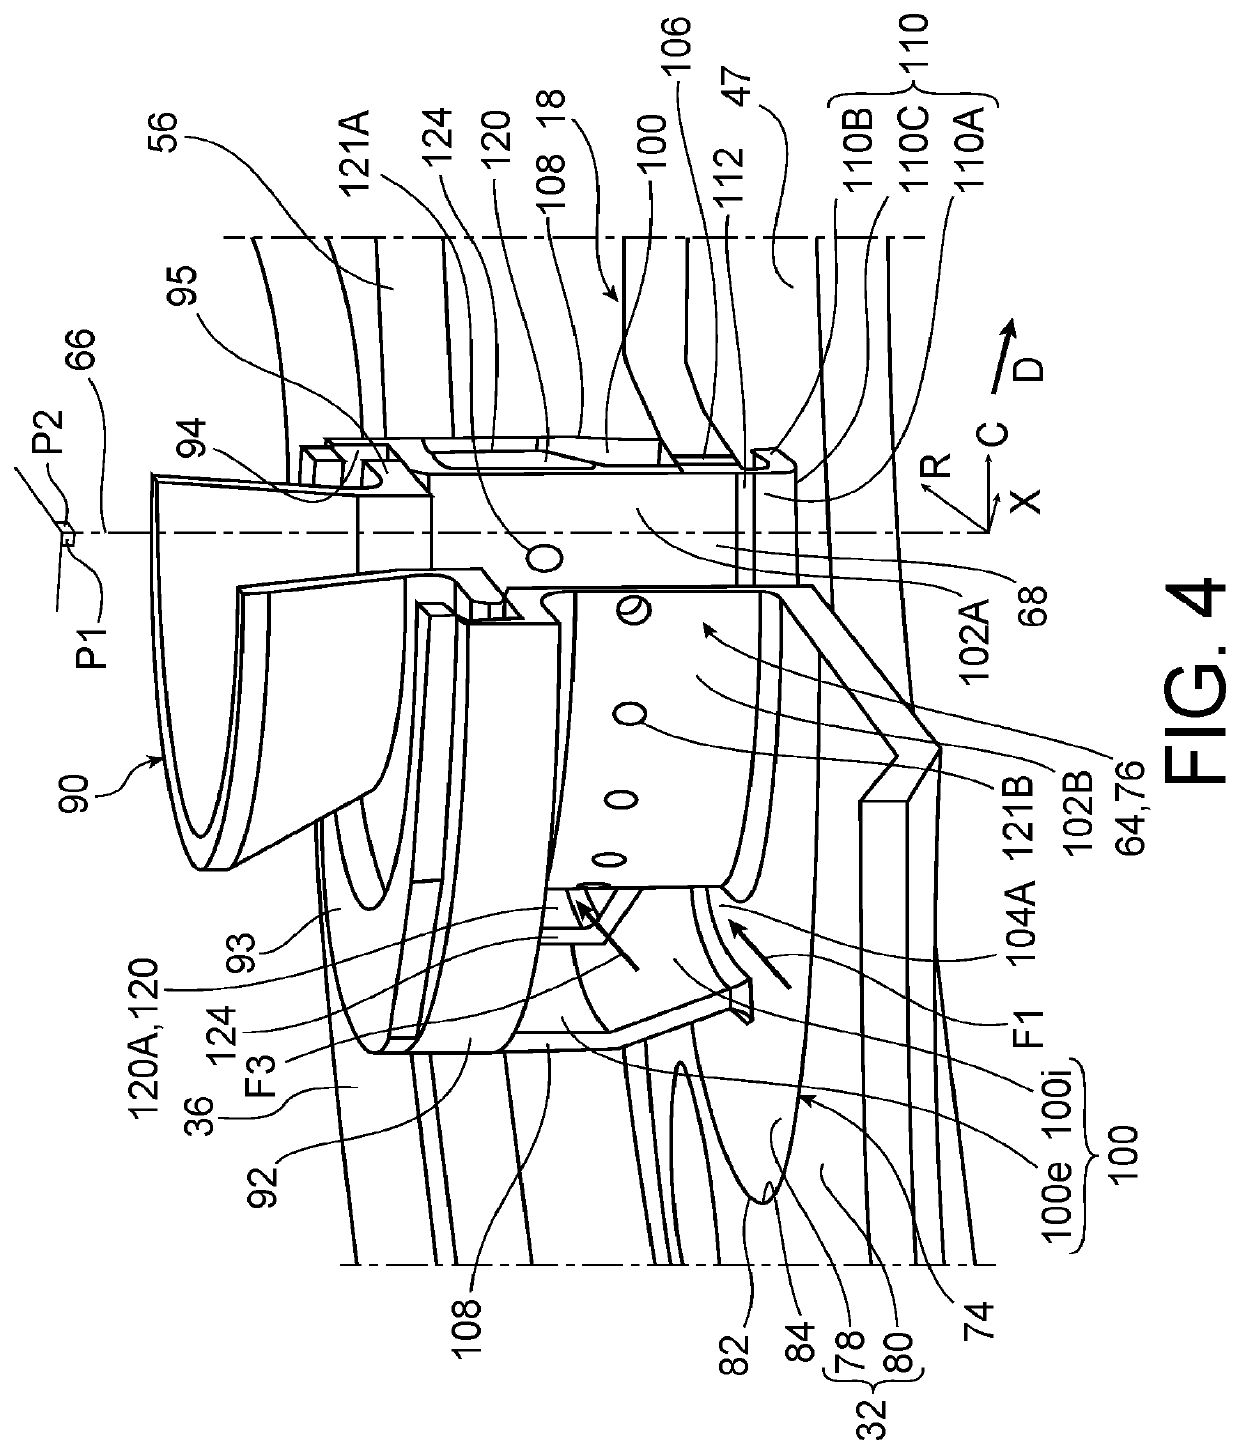 Combustion chamber comprising means for cooling an annular casing zone downstream of a chimney